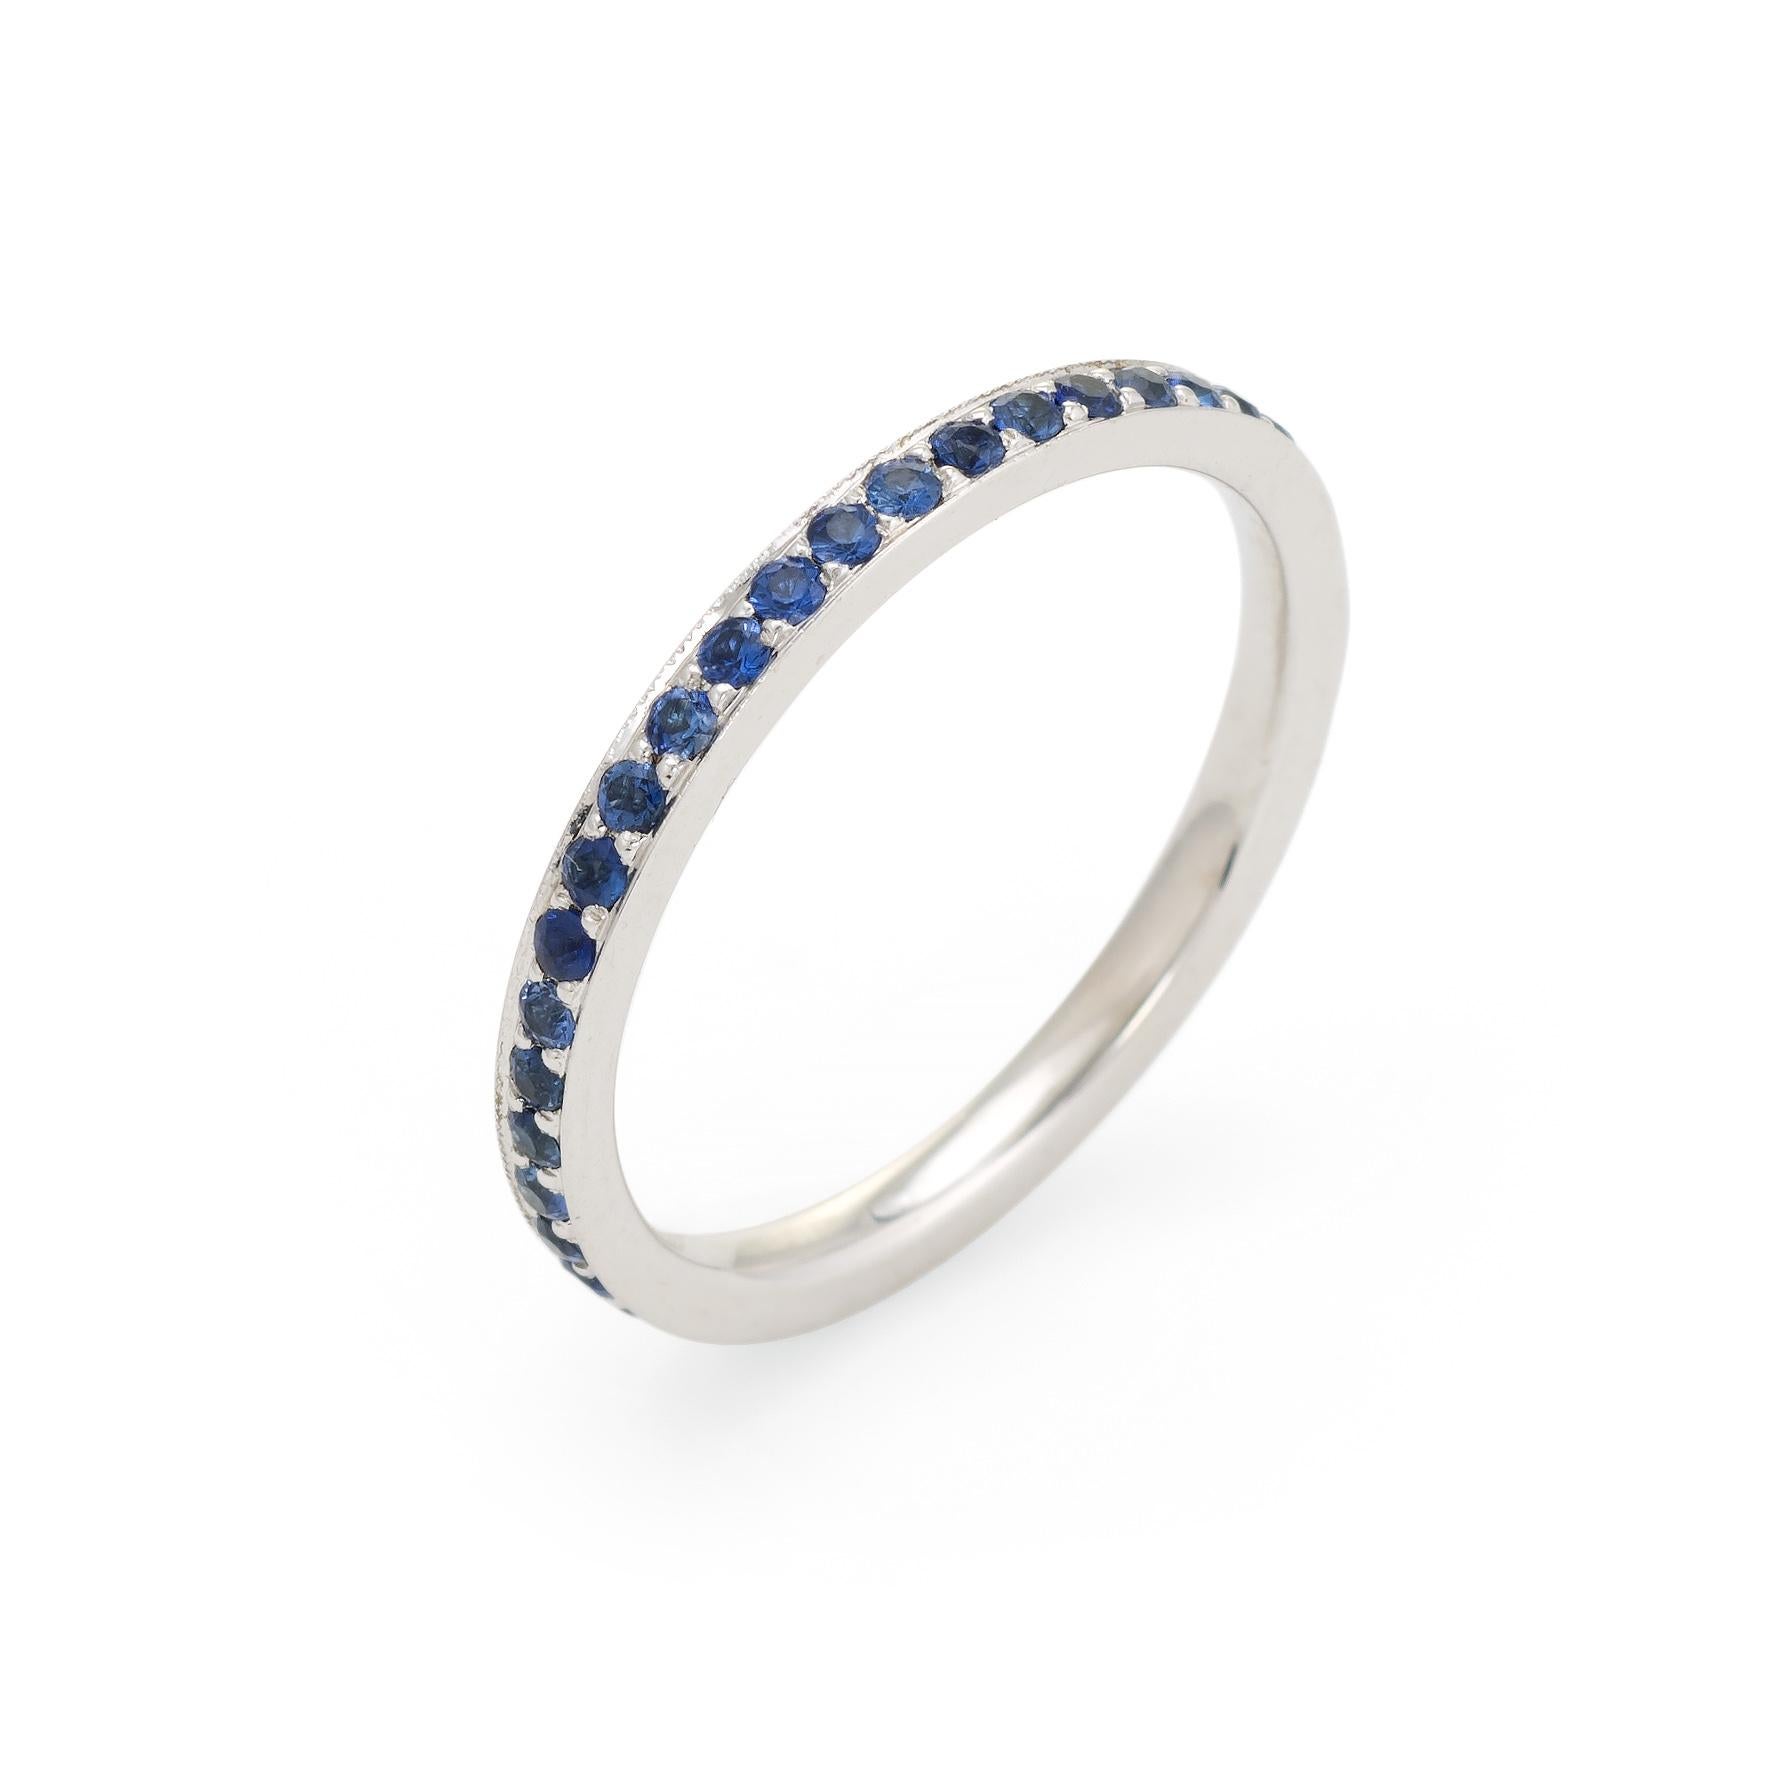 Elegant estate sapphire eternity band, crafted in 18 karat white gold. 

42 blue sapphires are estimated at 0.01 carats each, totaling an estimated 0.42 carats. The sapphires are in excellent condition and free or cracks or chips.  

The ring is in